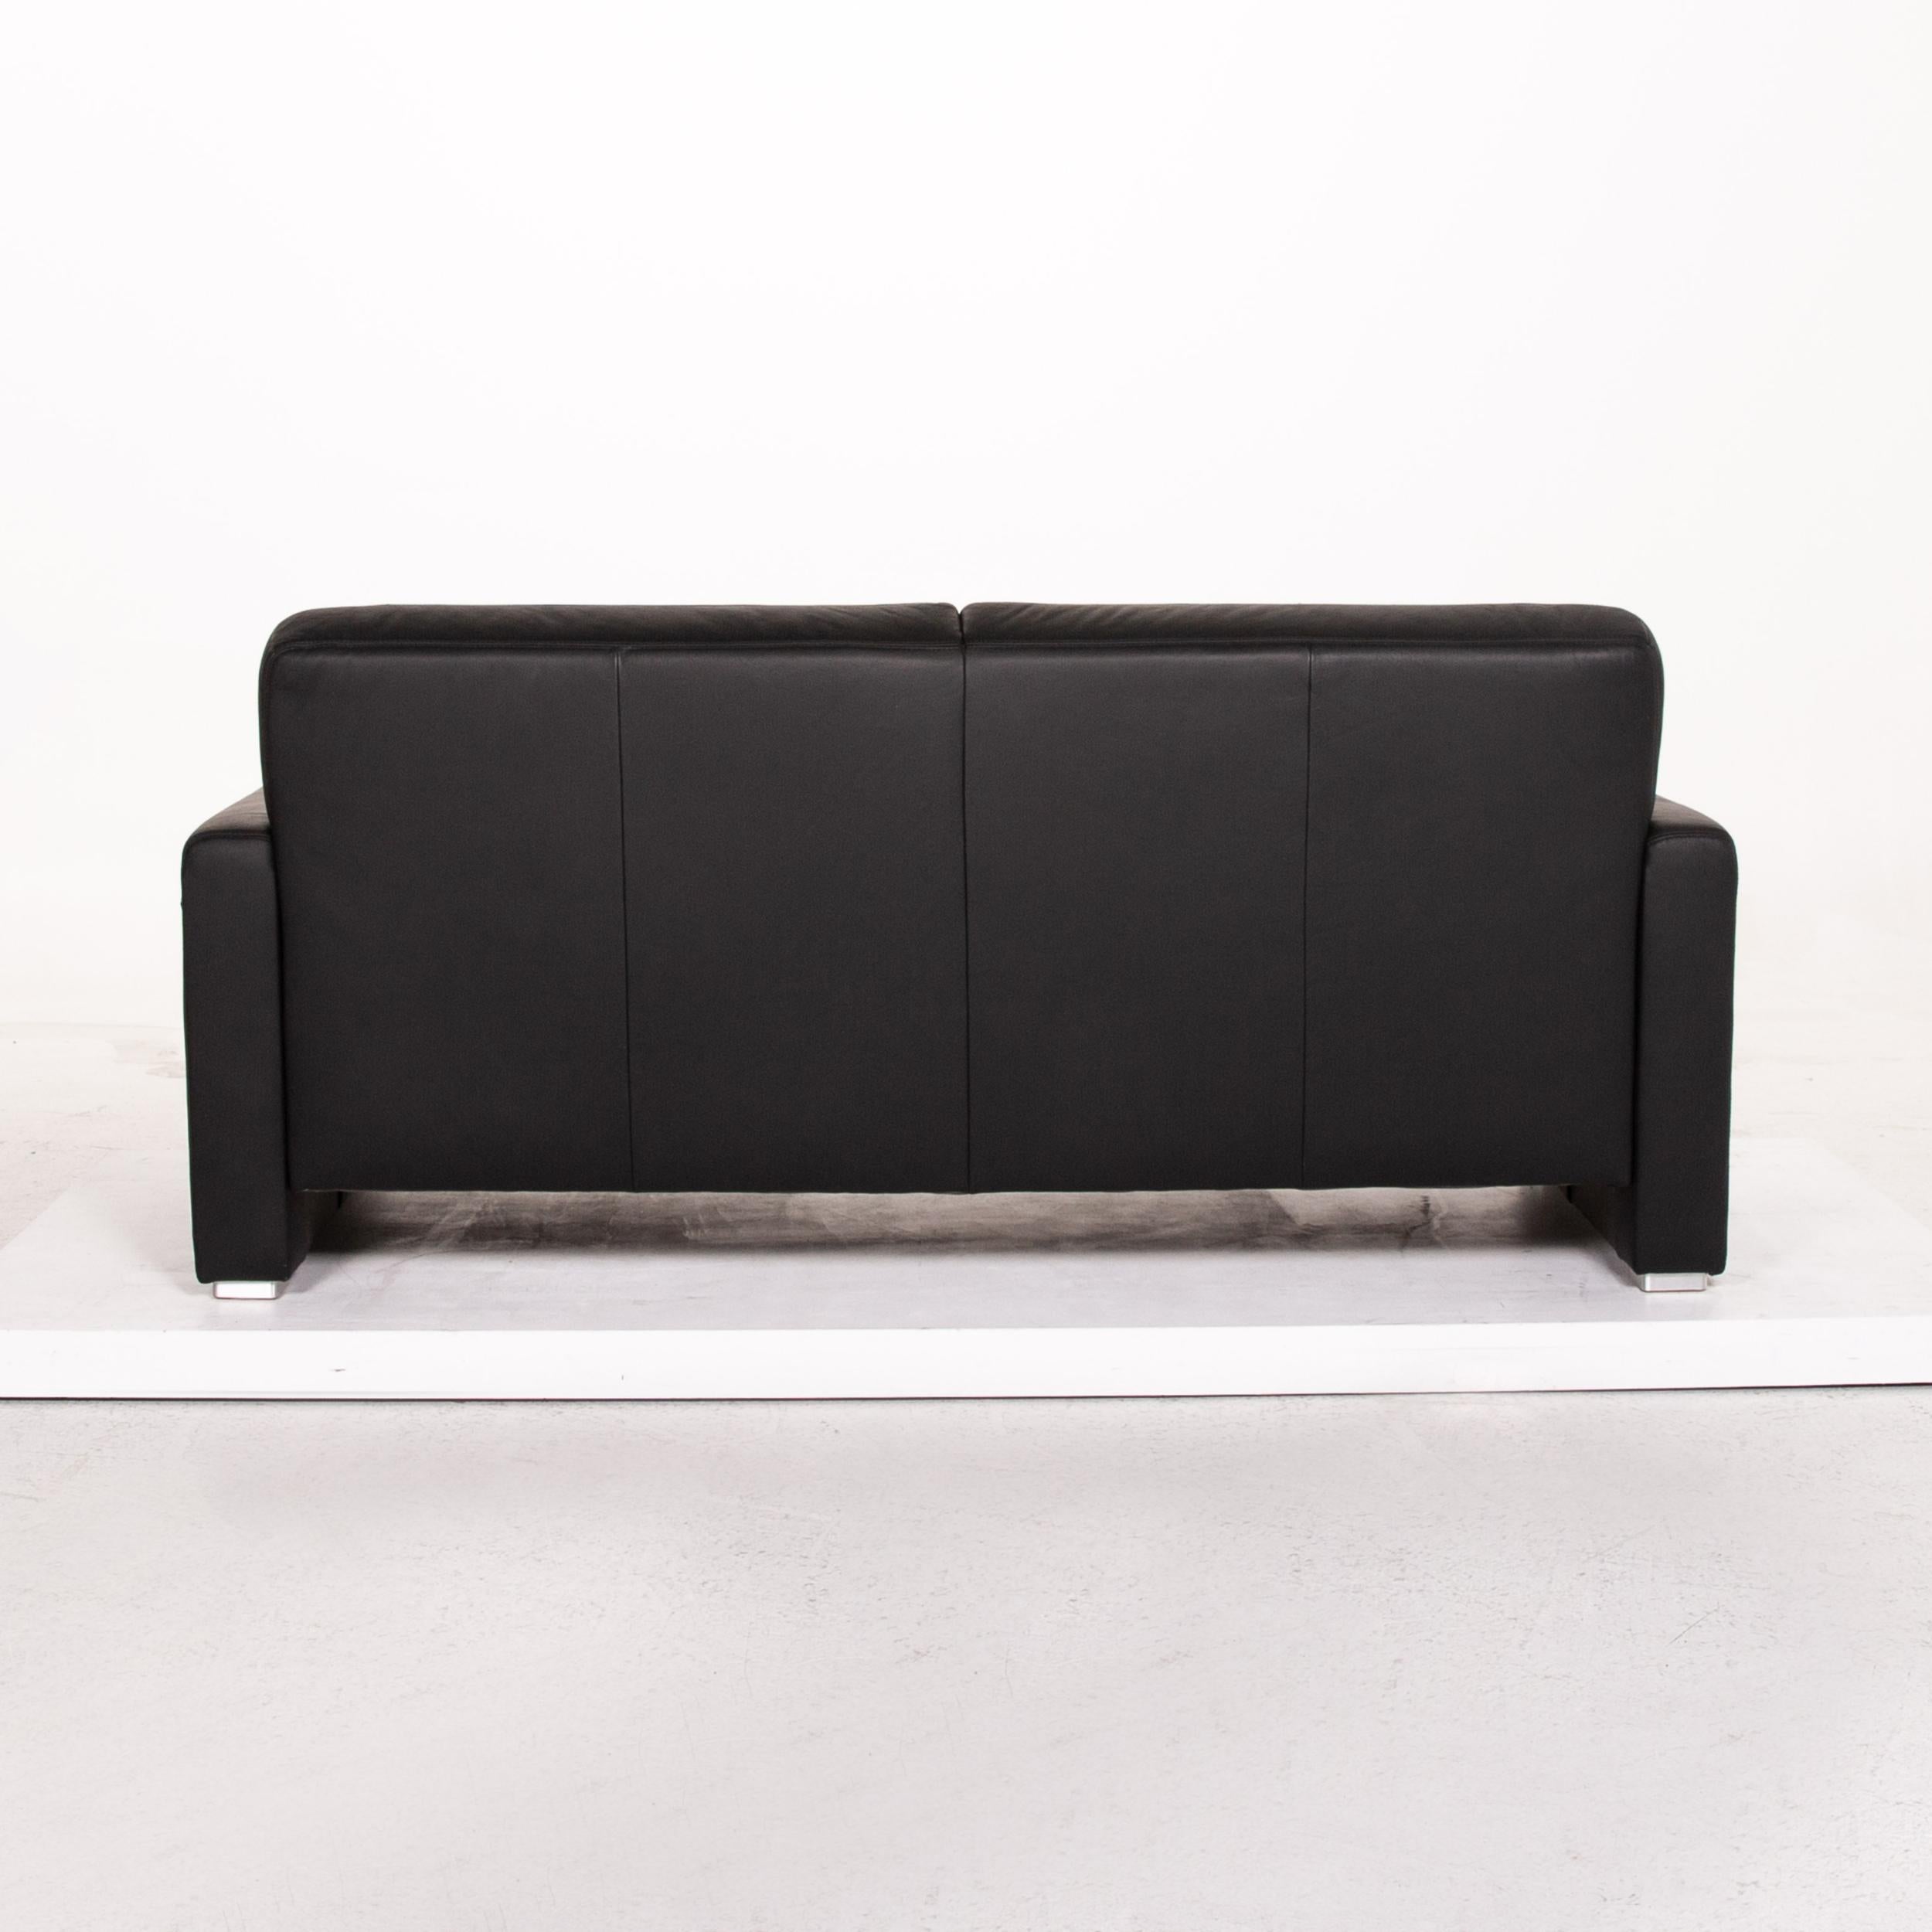 Sample Ring Leather Sofa Set Black 1 Three-Seat 1 Two-Seat Couch For Sale 7